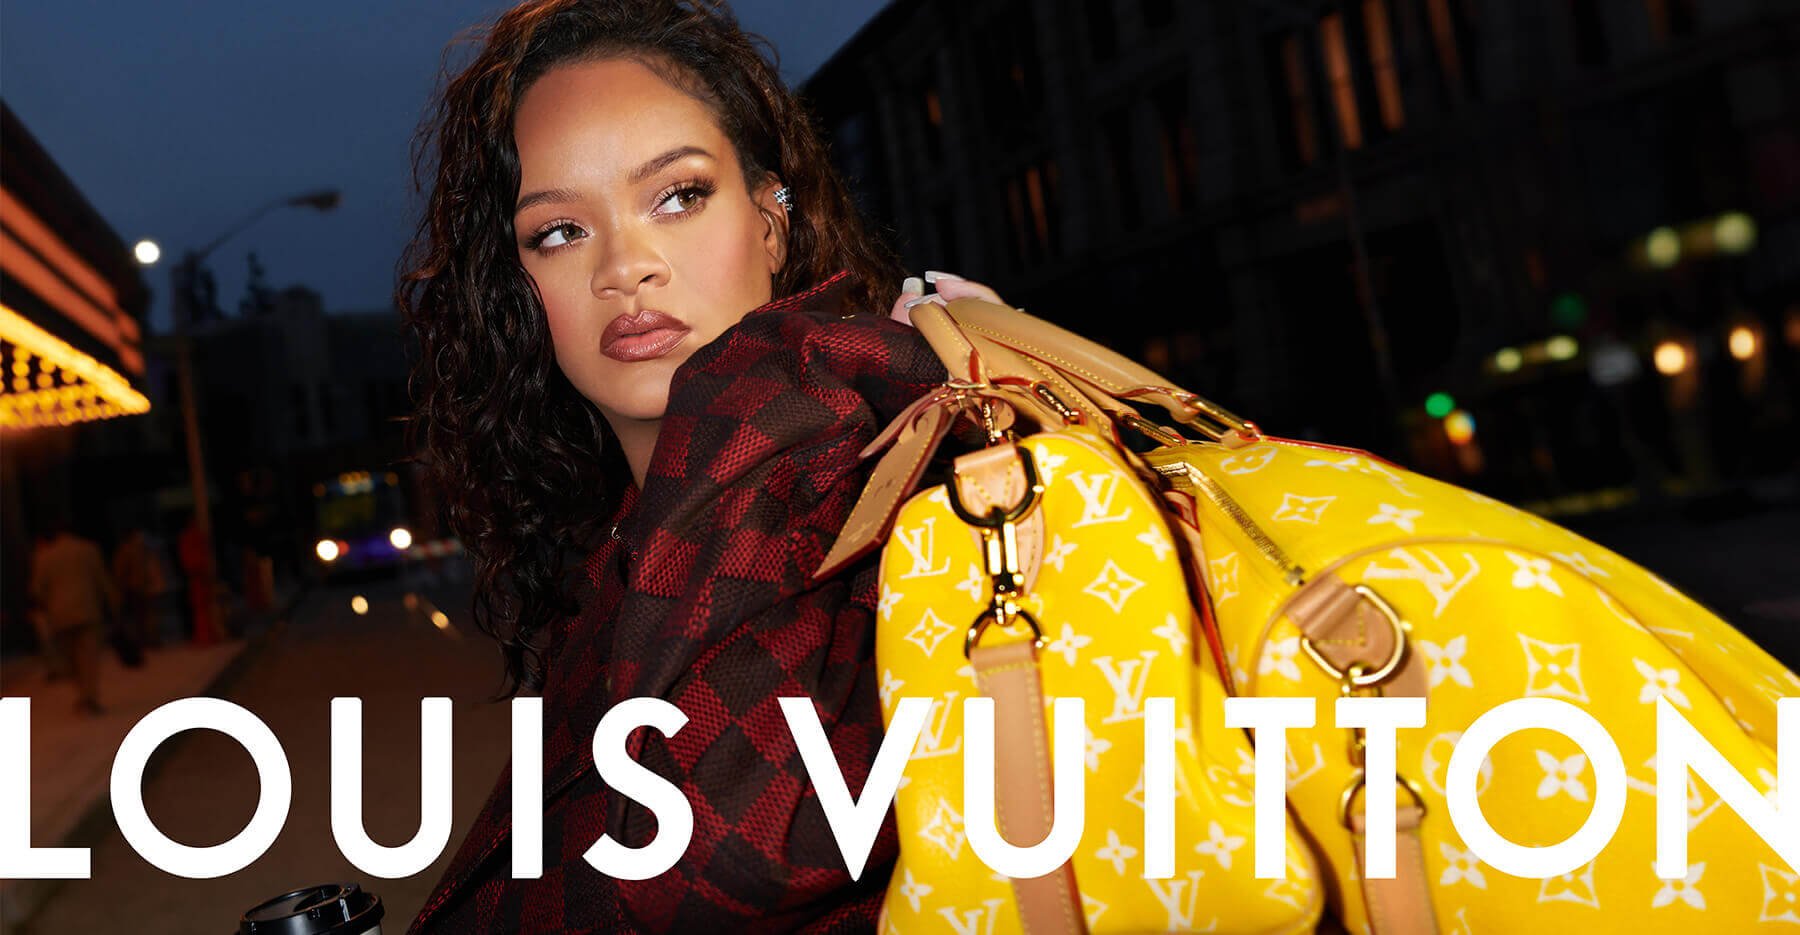 j-hope stars in the latest Louis Vuitton Keepall campaign - The